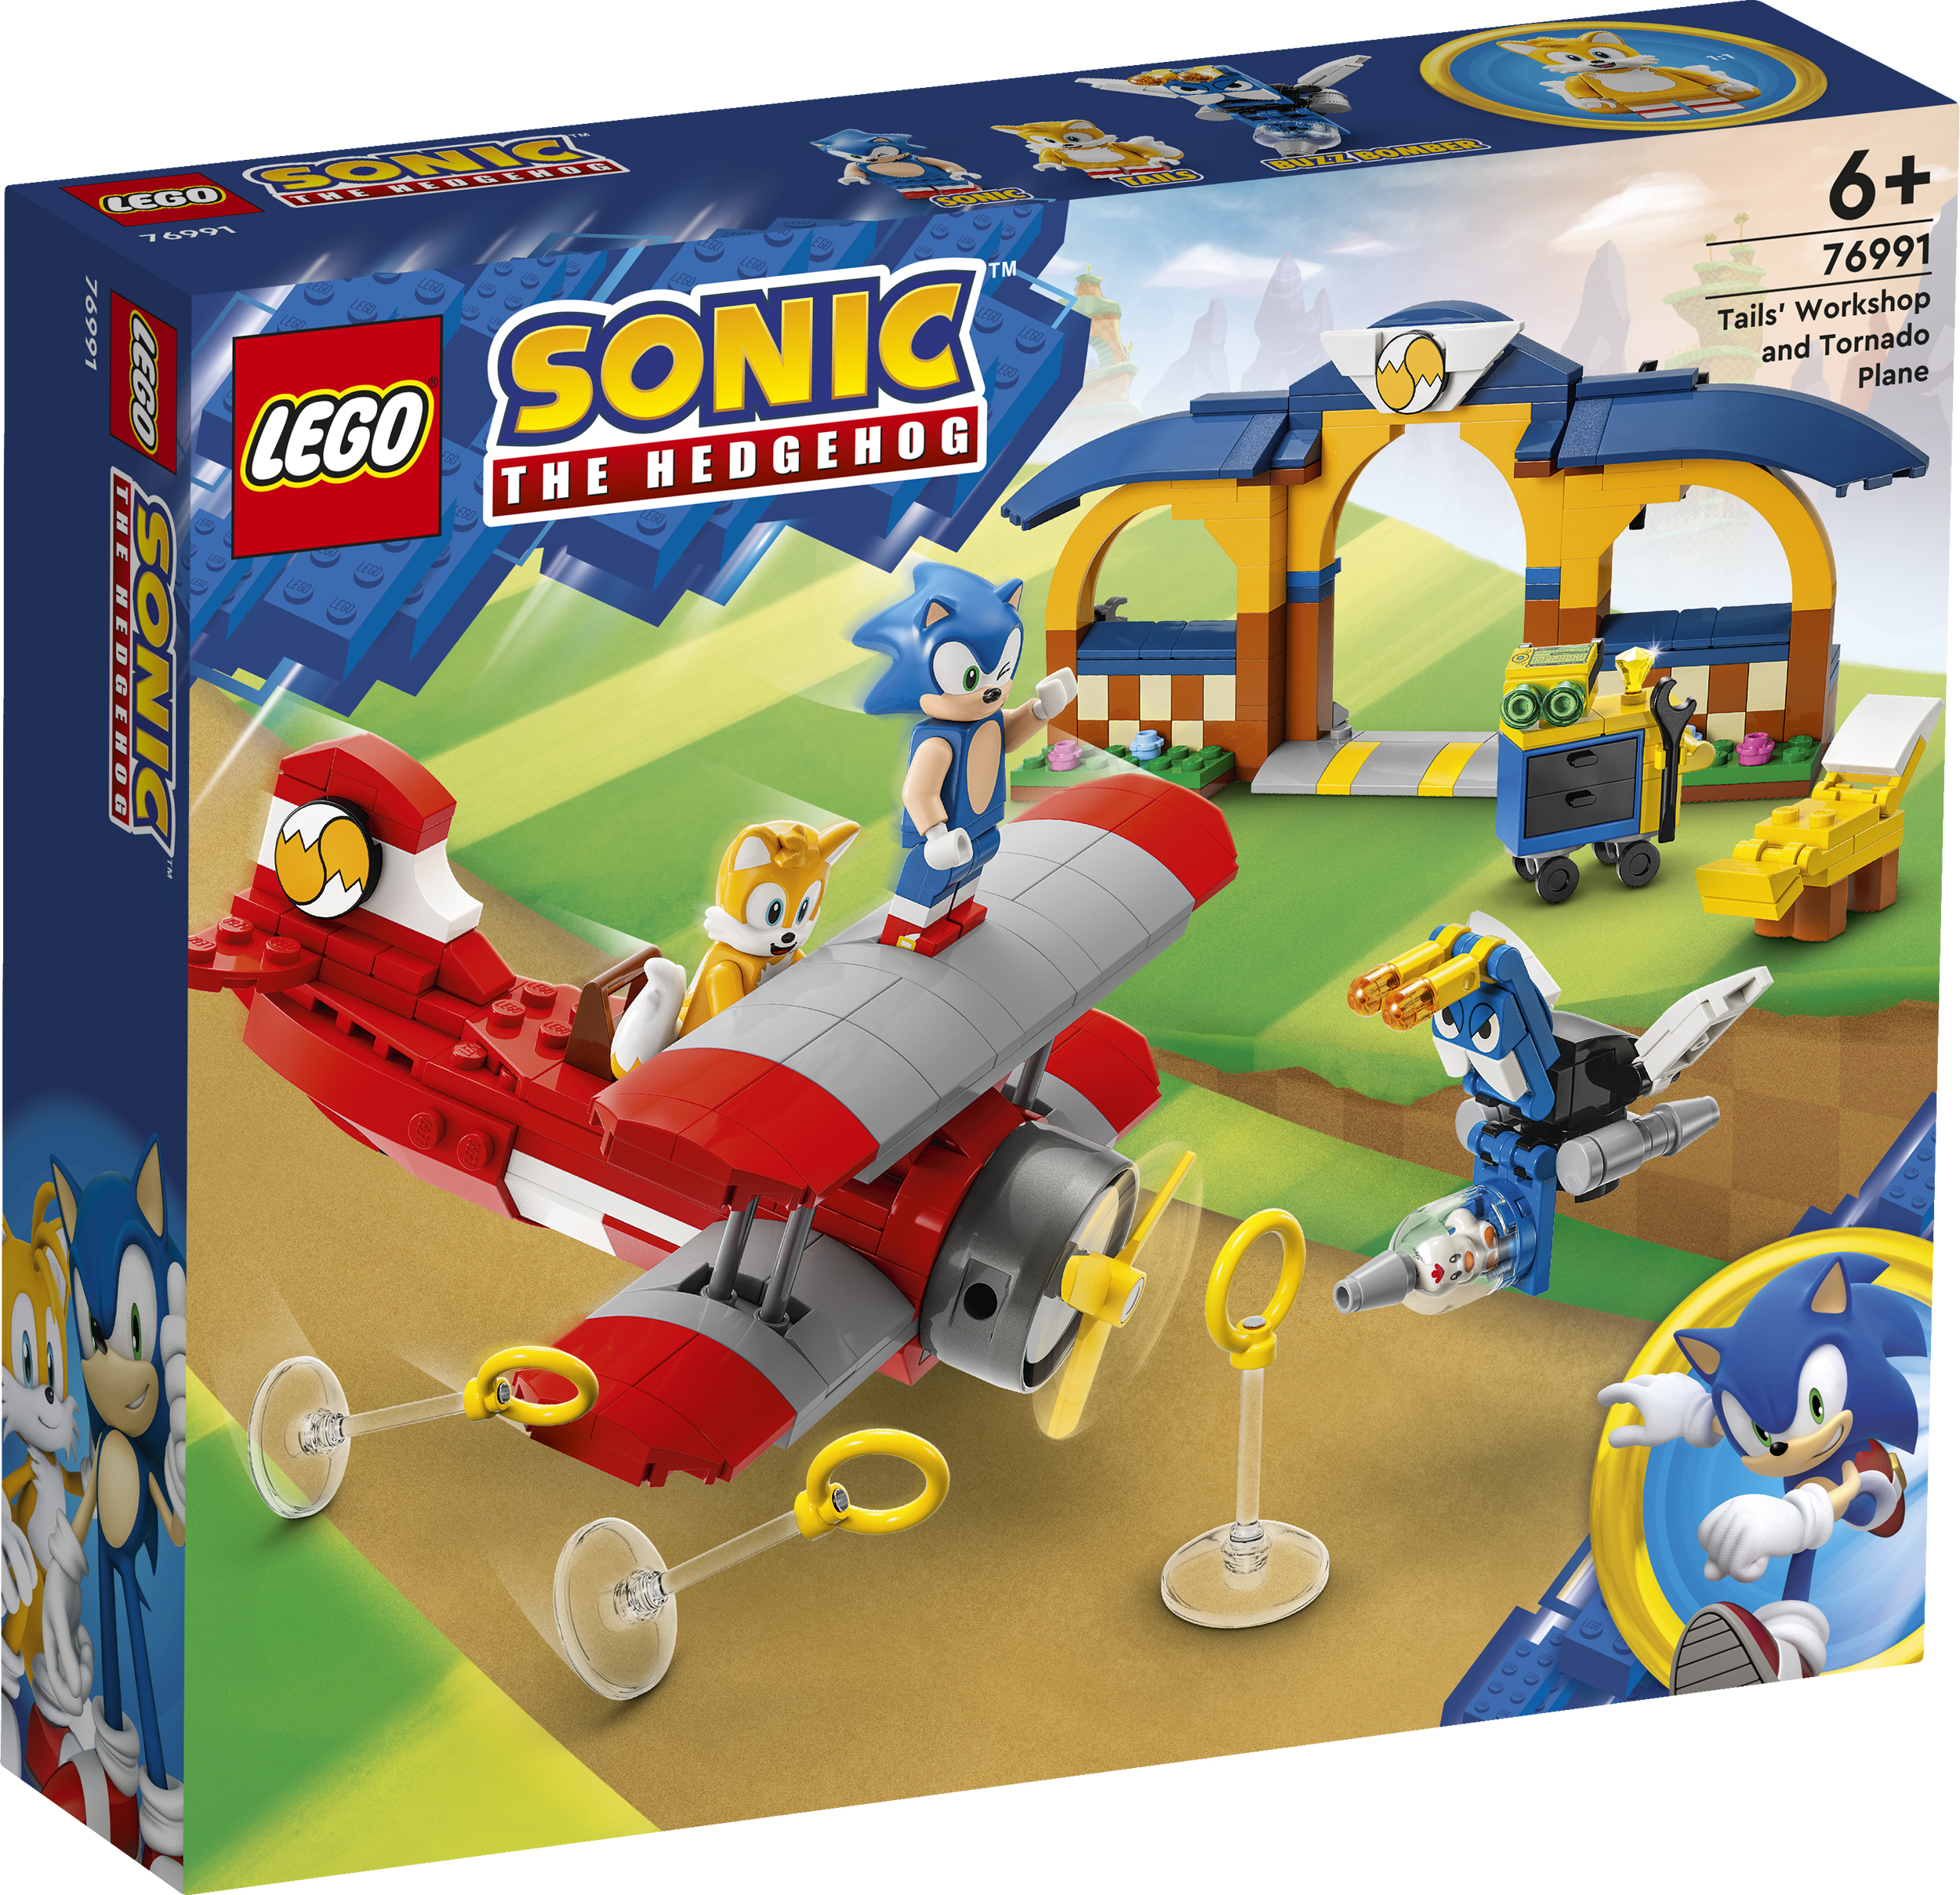 Lego Ideas: Sonic the Hedgehog Green Hill Zone - 21331 New Sealed IN HAND